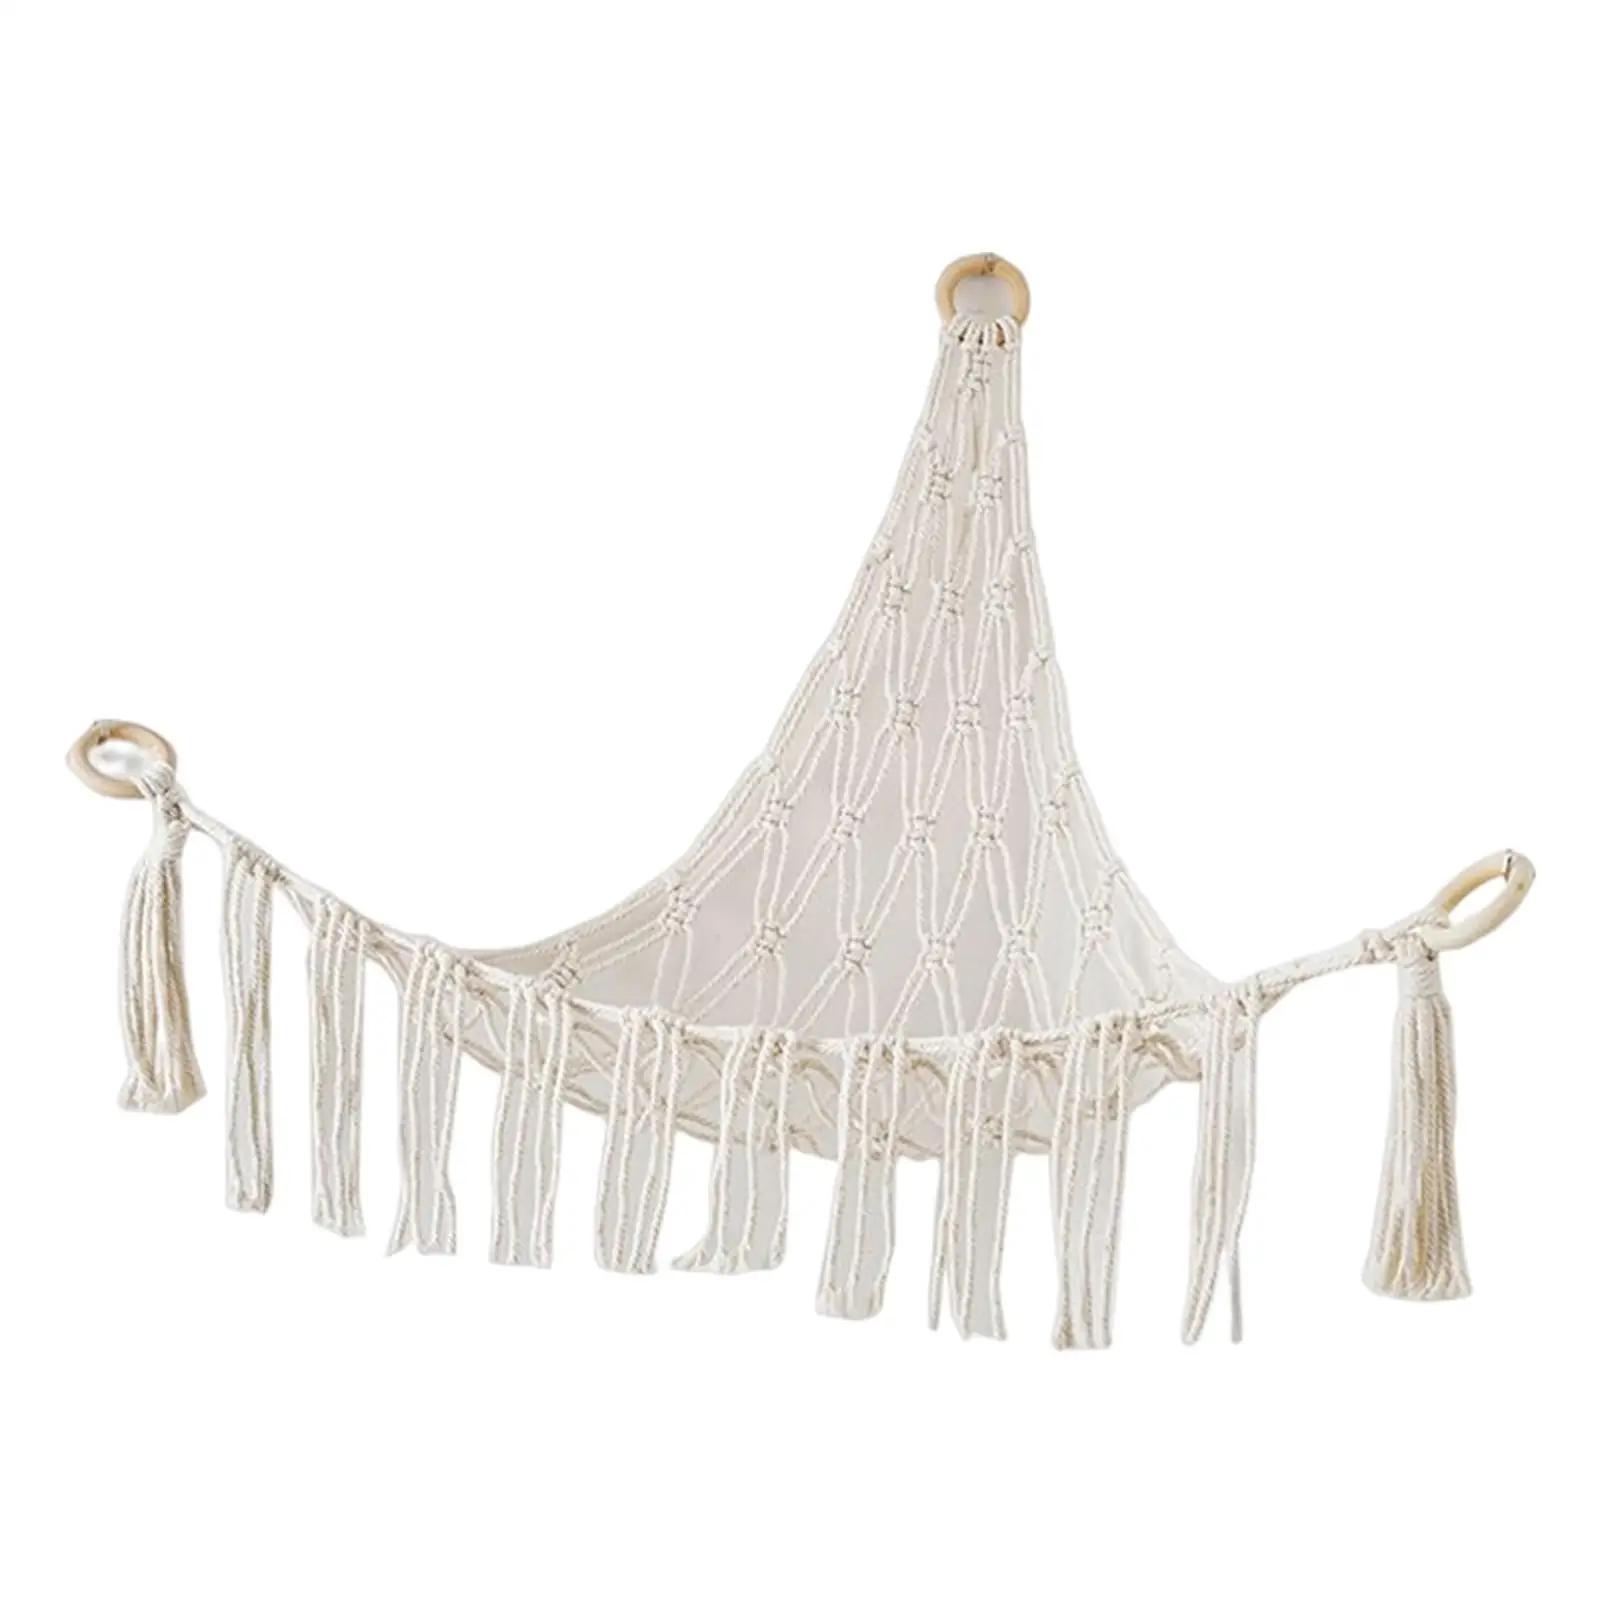 Boho Toy Hammock with Tassels Display Holder Soft with Hook Stuffed Toy Storage Net for Bedroom Home Decoration Birthday Gift